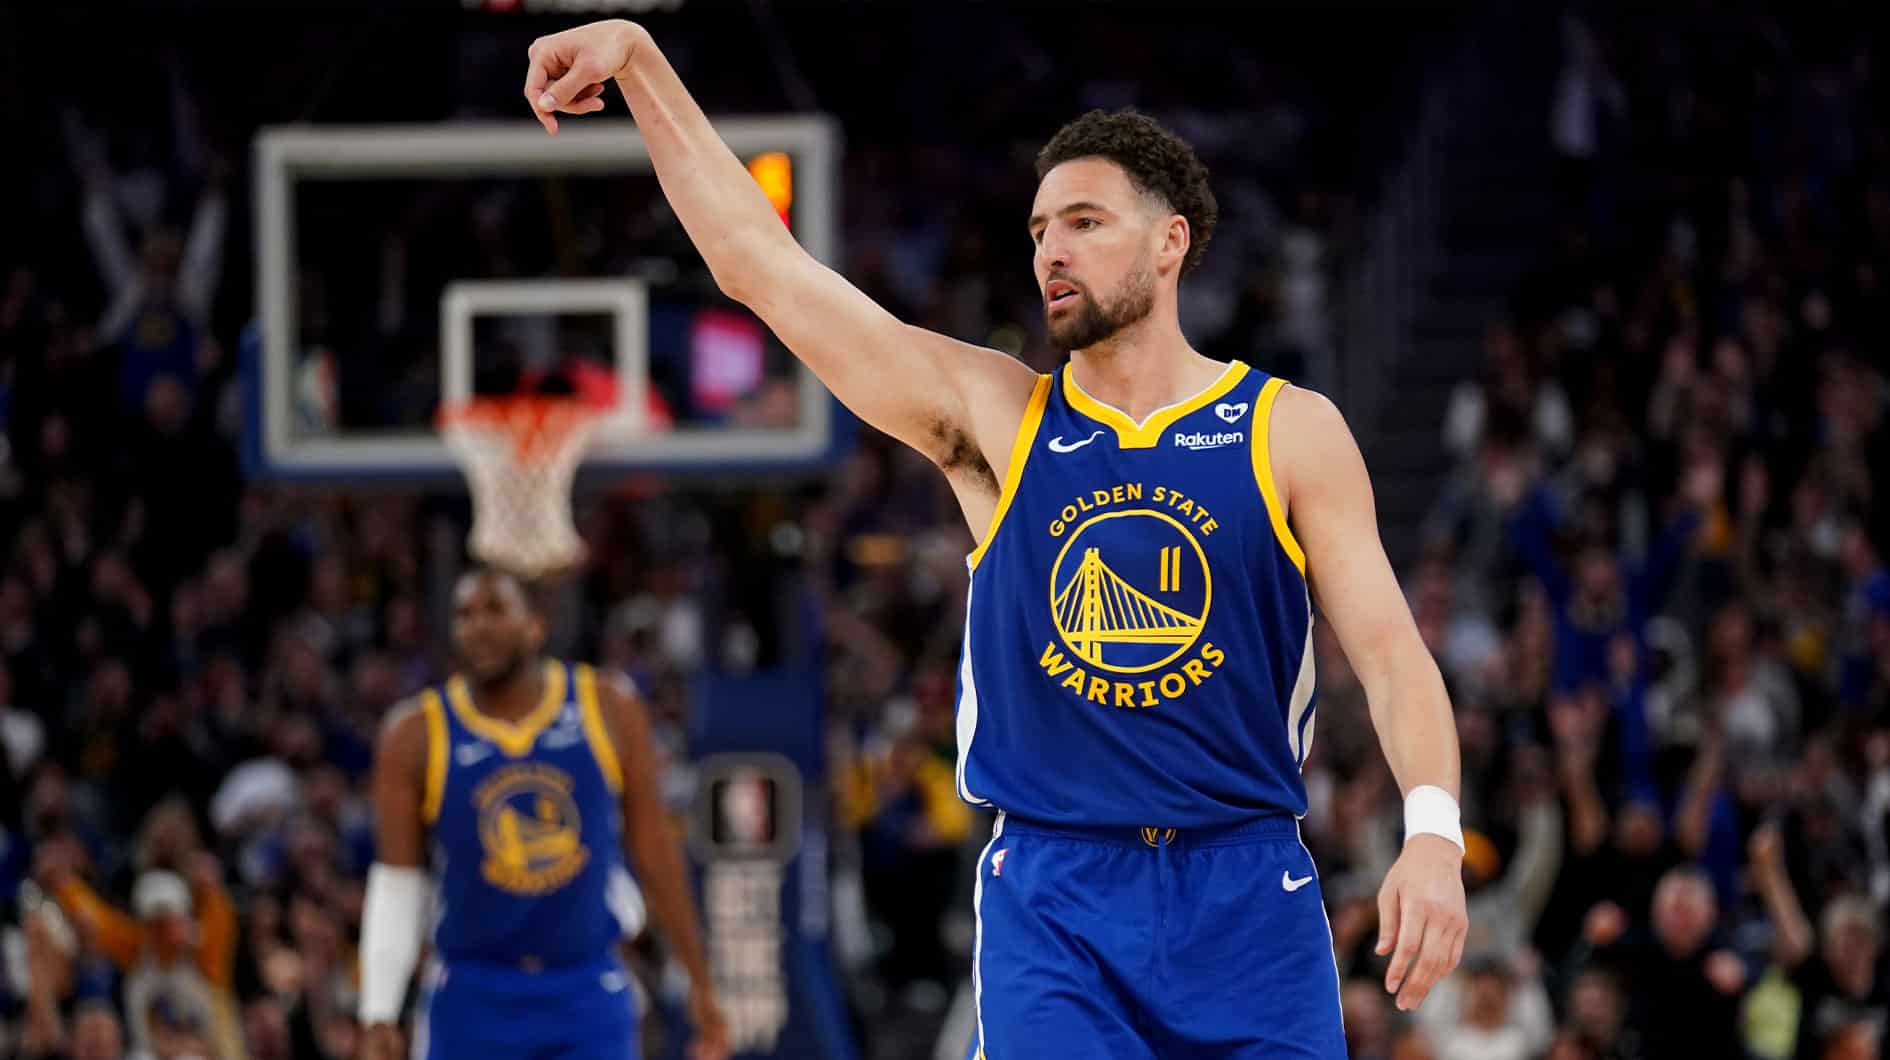 Golden State Warriors guard Klay Thompson (11) reacts after making a three point basket against the Dallas Mavericks in the fourth quarter at the Chase Center